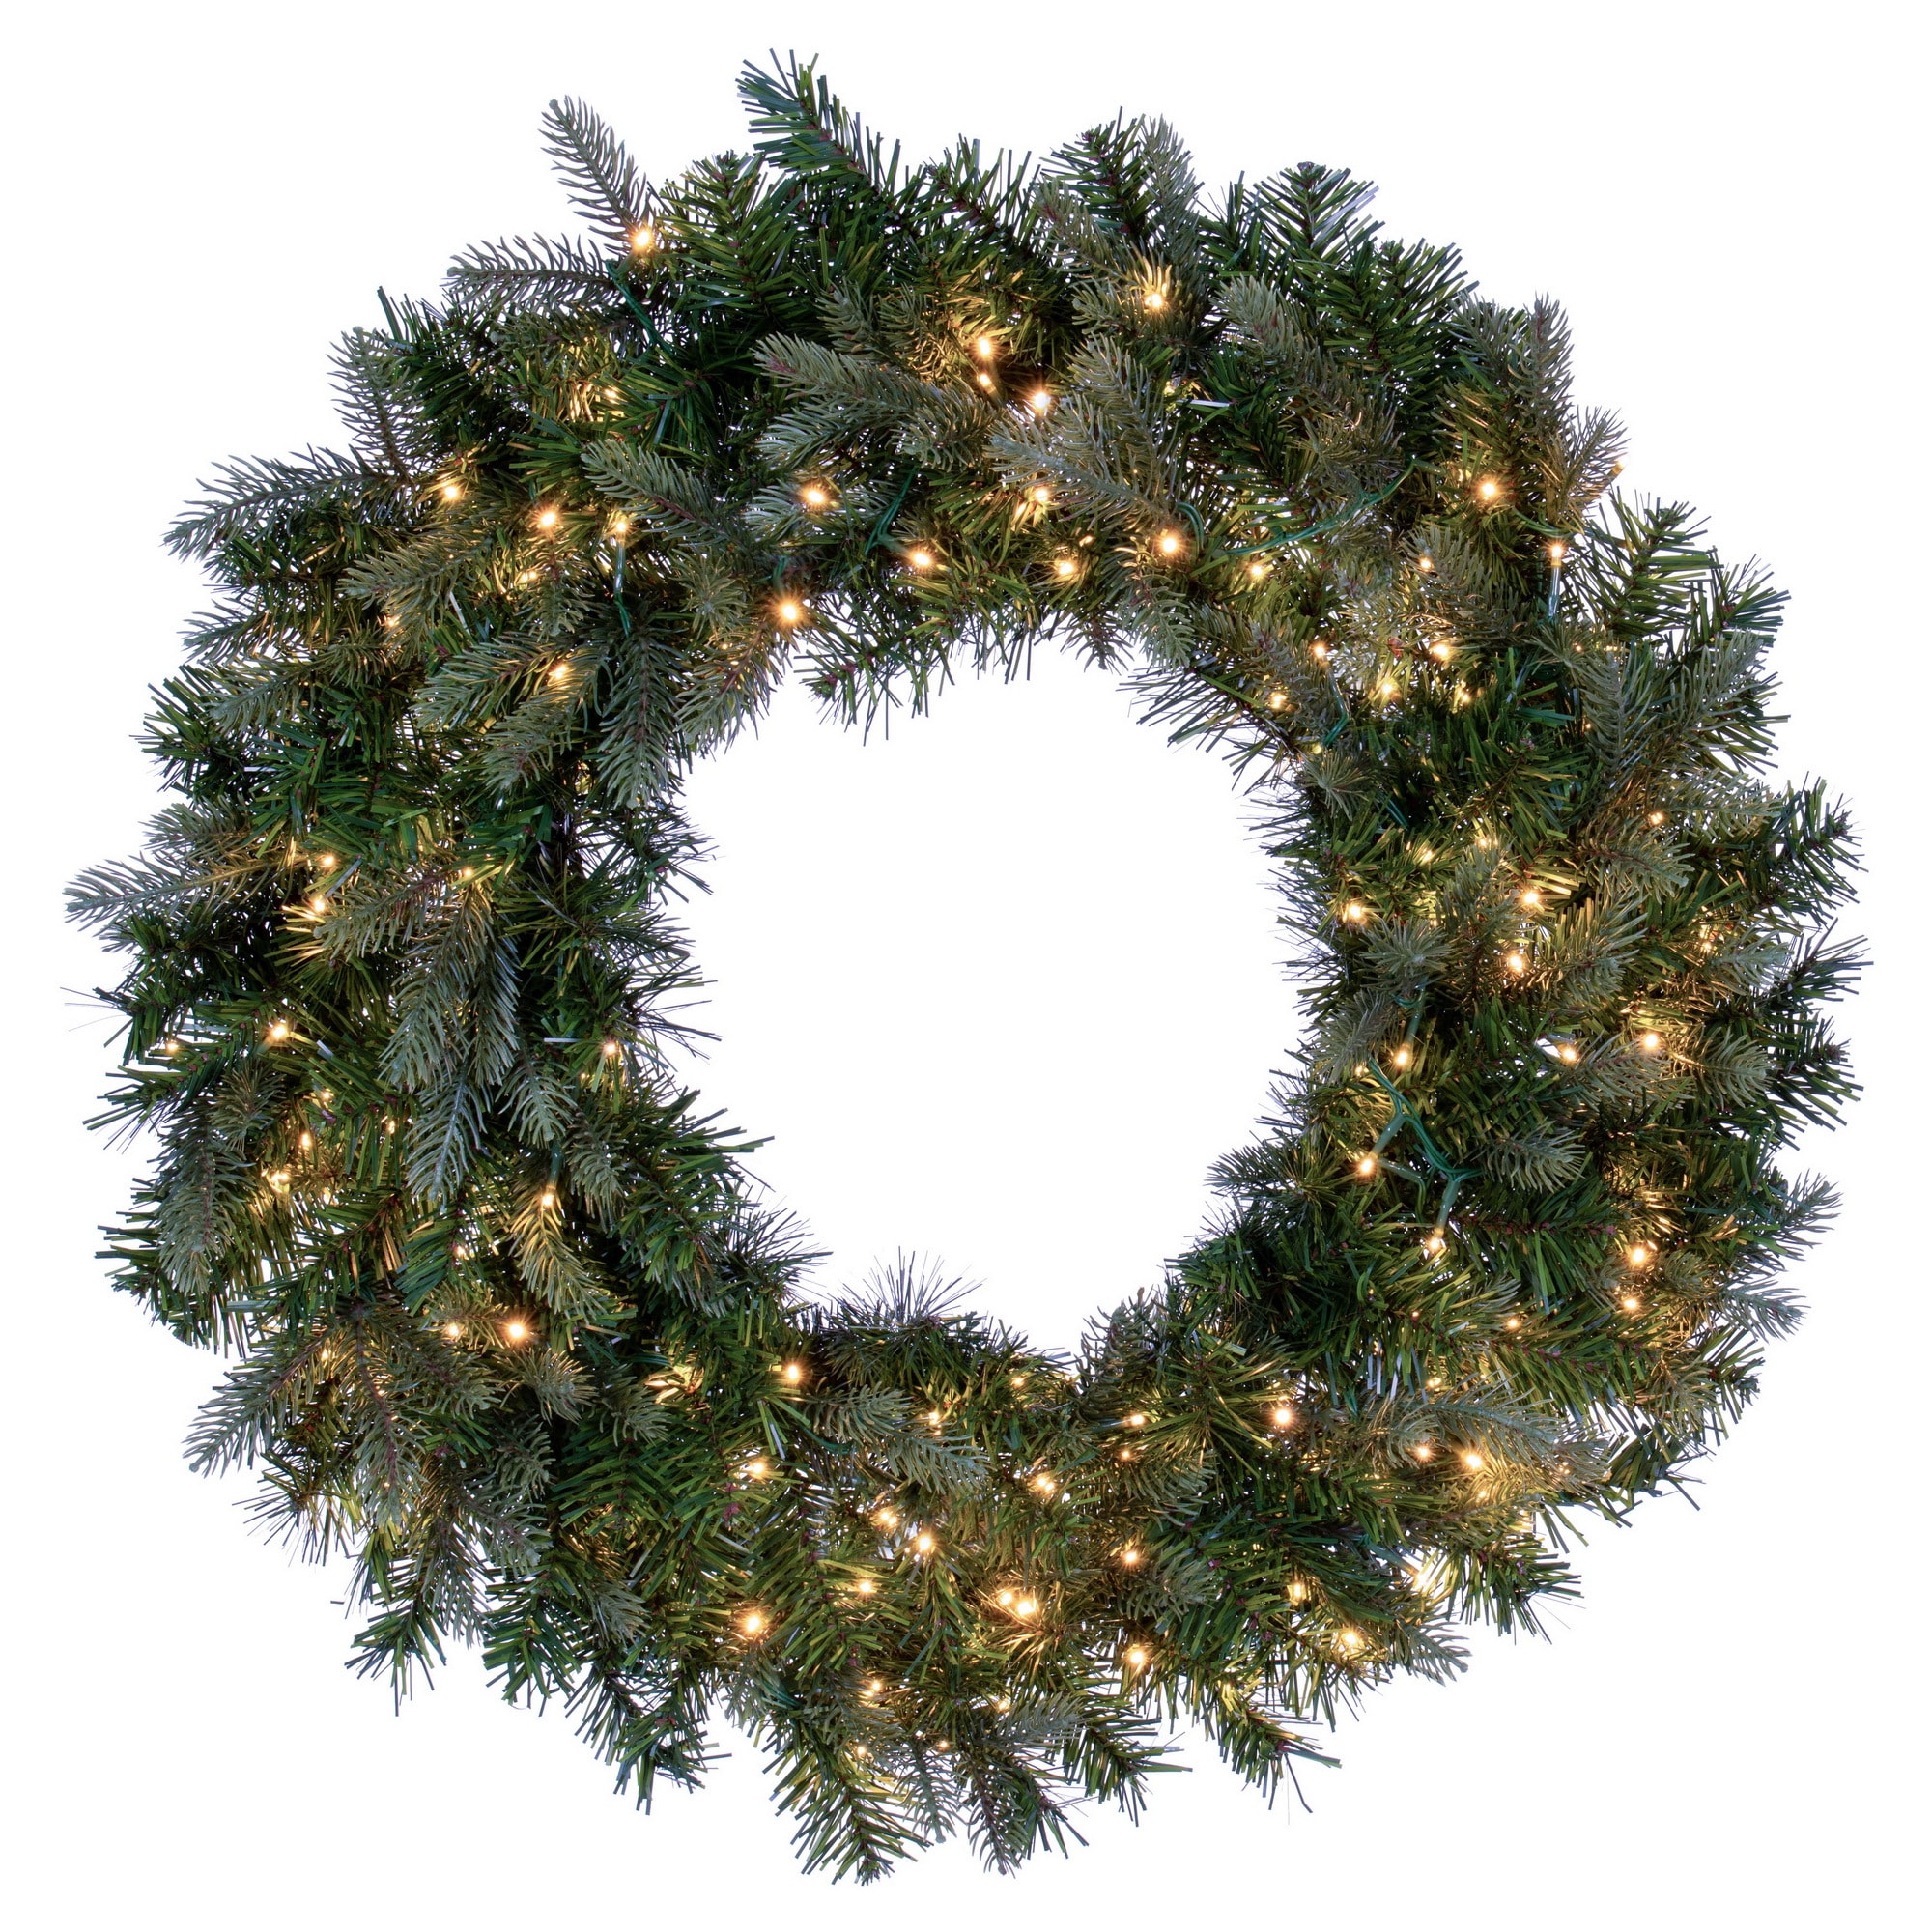 Best Choice Products 48in Pre-Lit Outdoor Christmas Wreath, LED Metal Holiday Decor w/ 140 Lights, Bow - Gold/Red